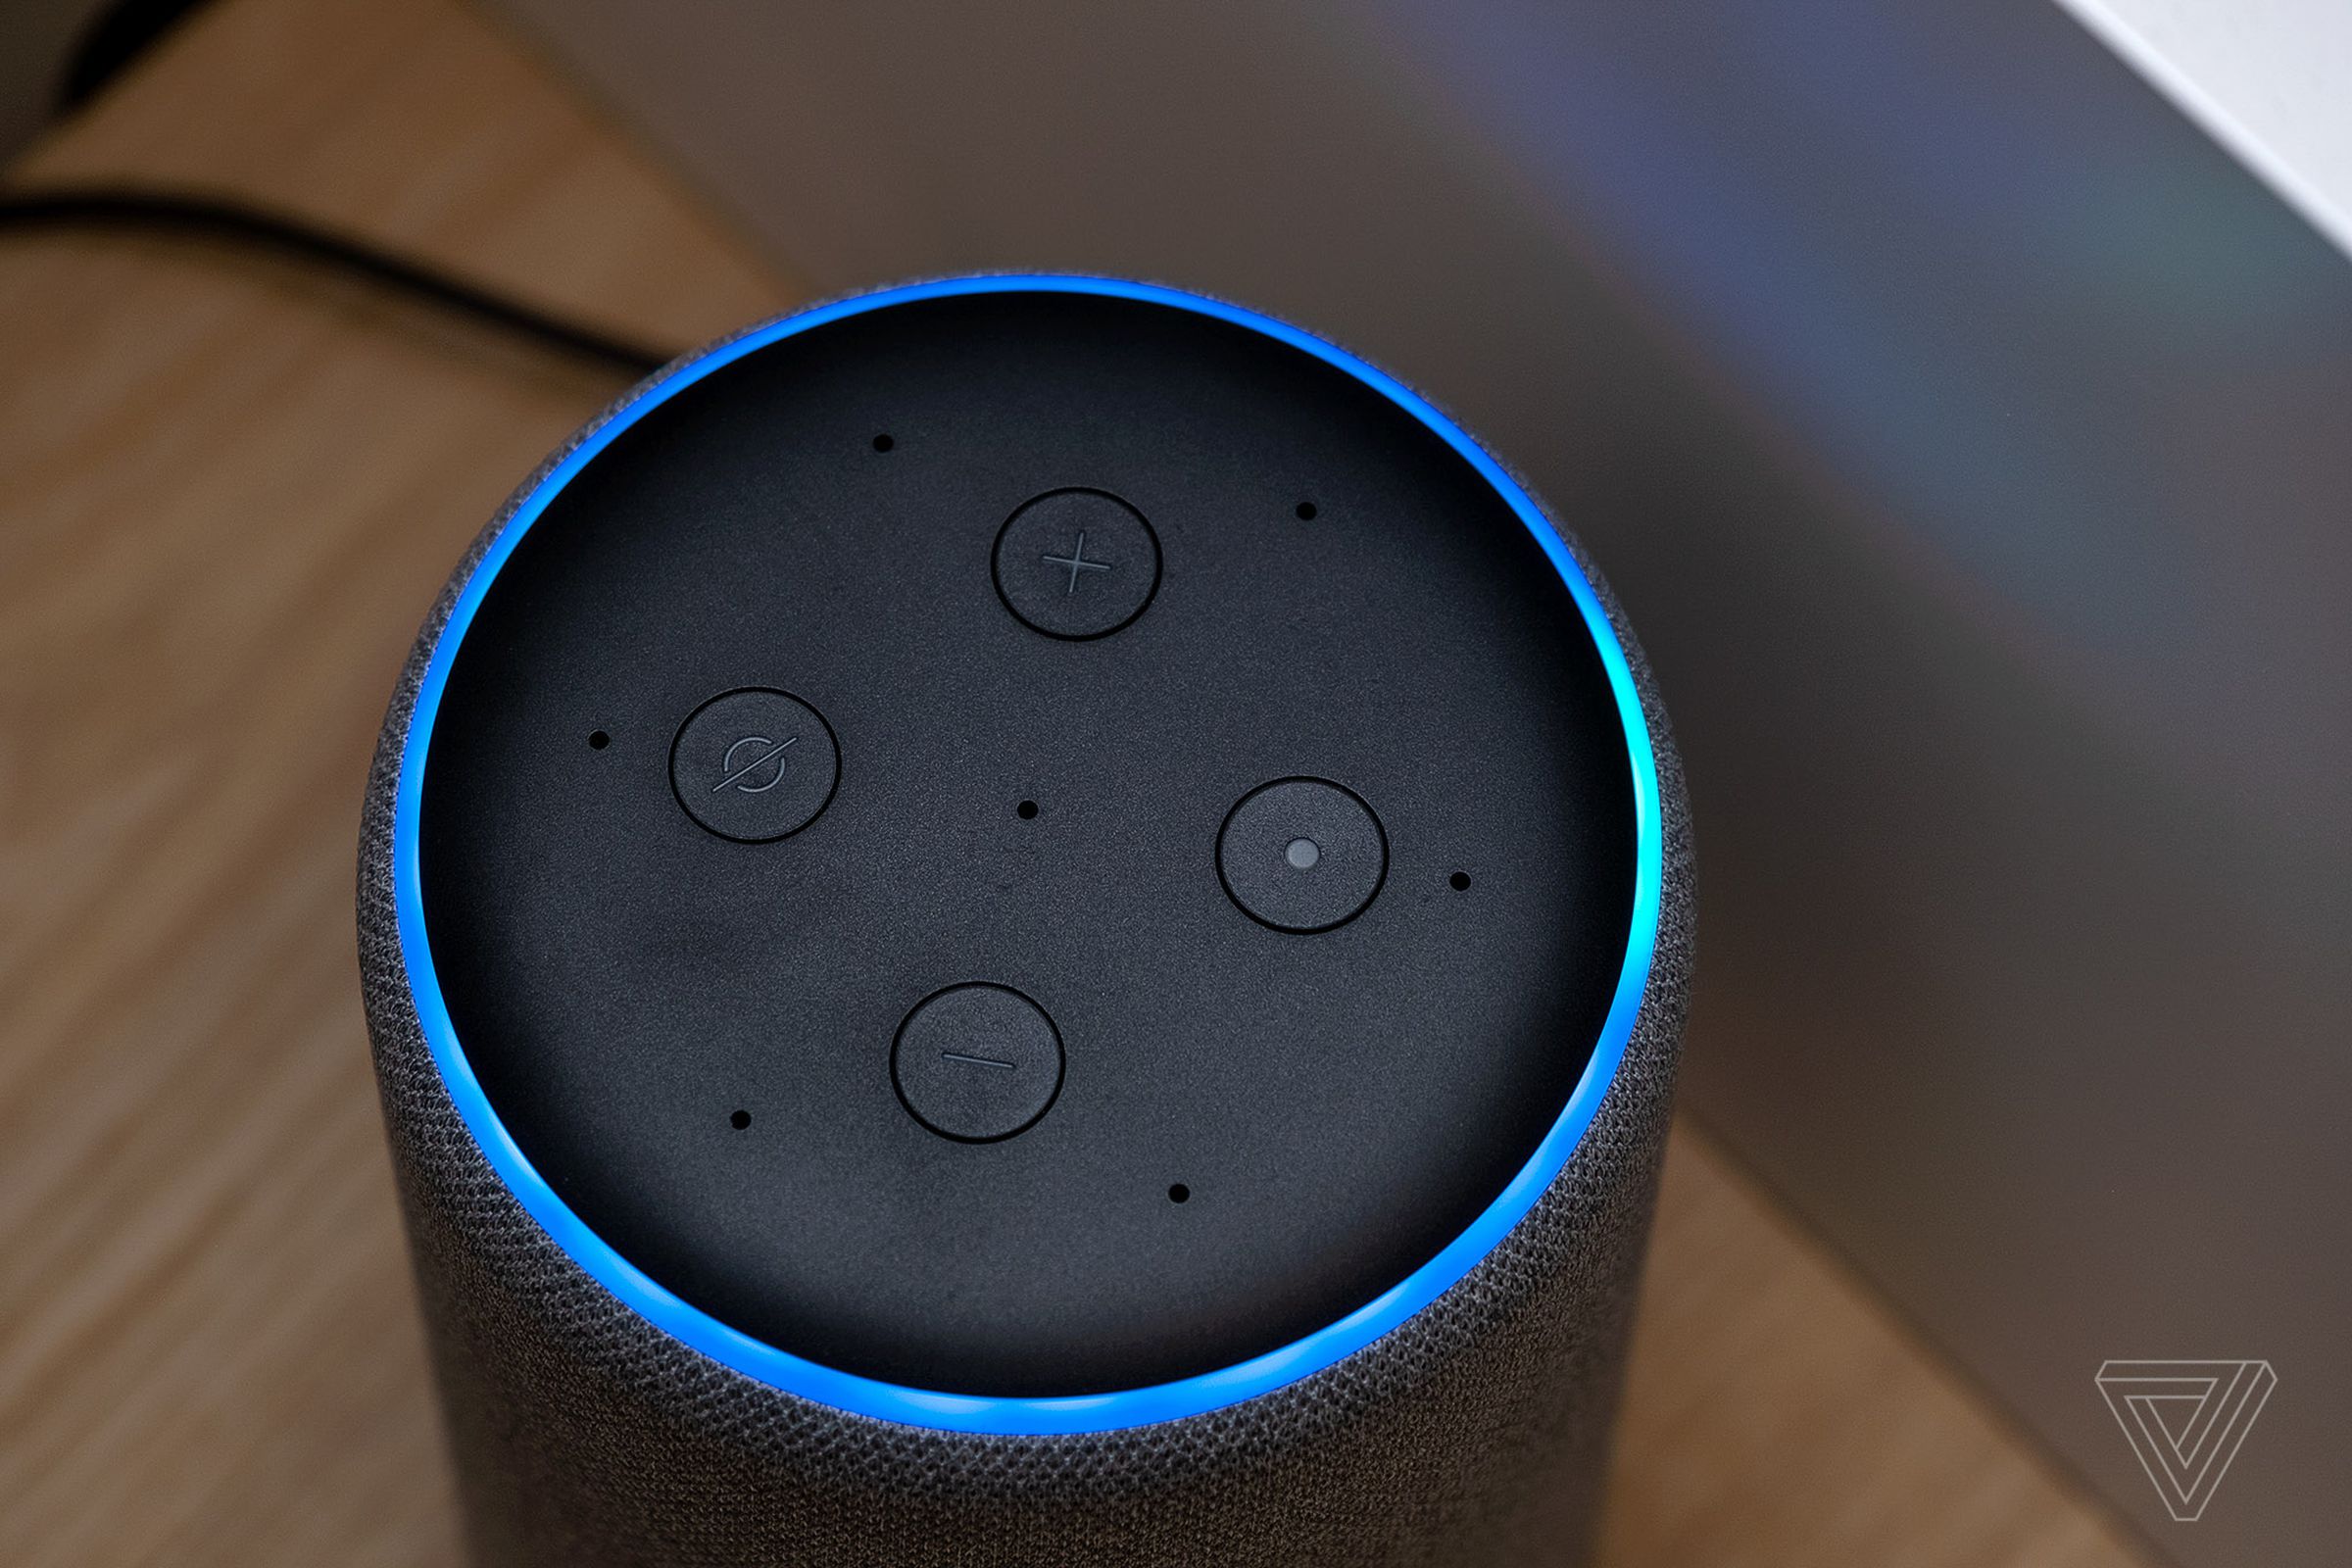 The seven mic array on the Echo is very good at picking up voice commands